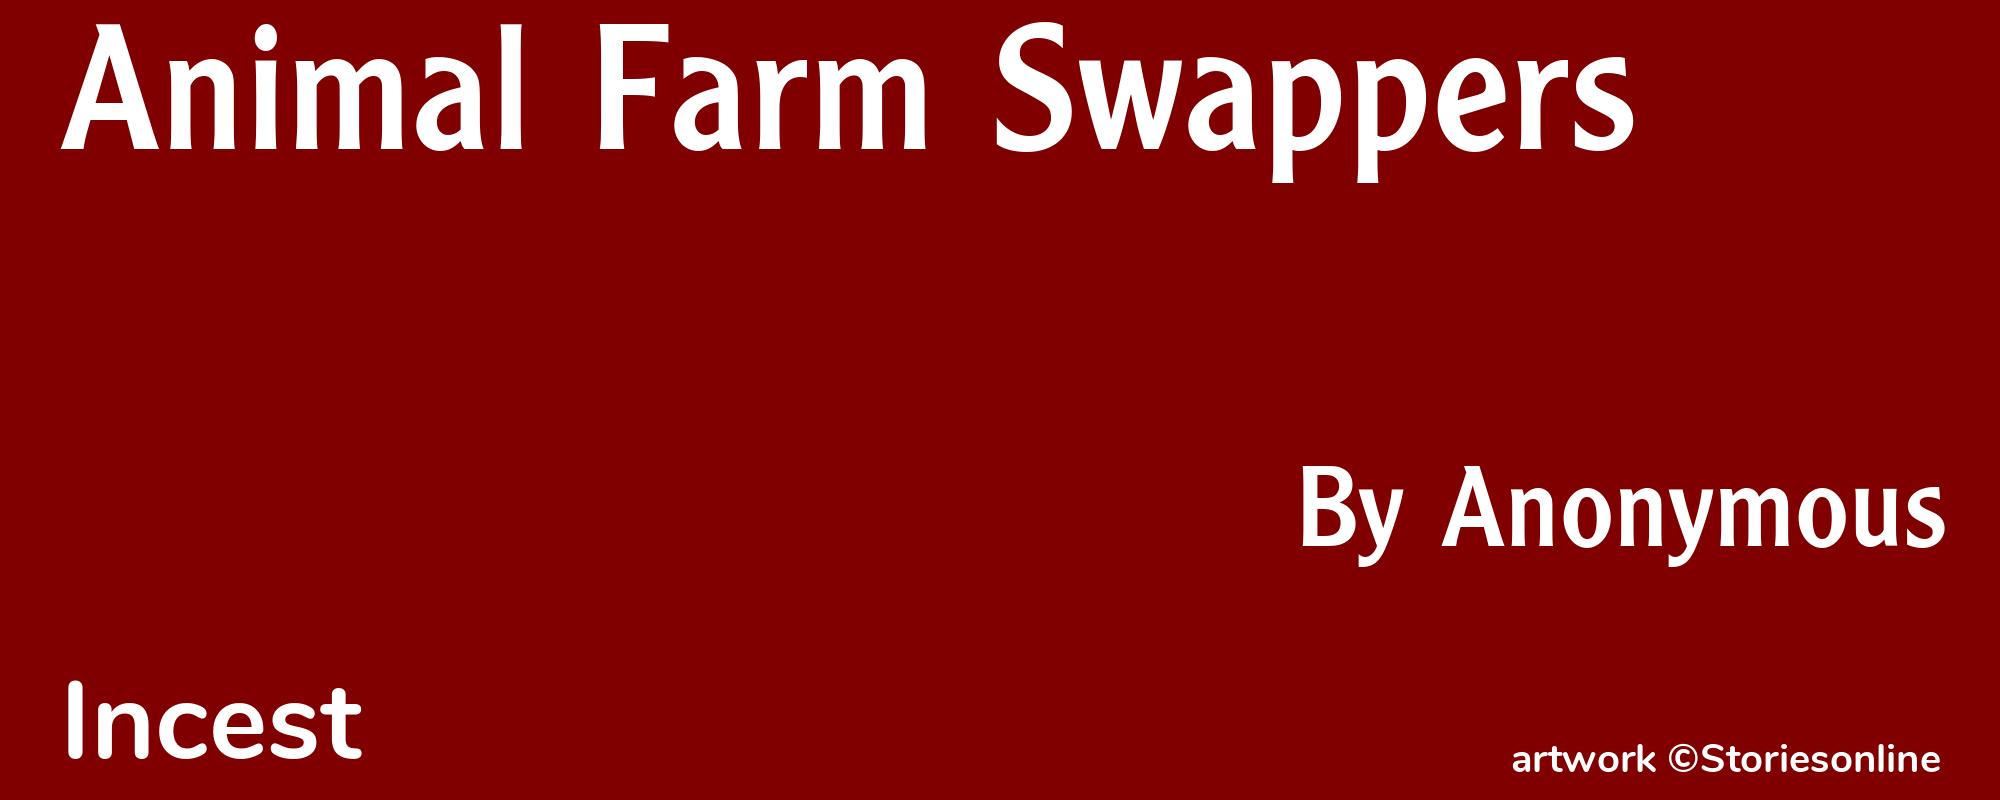 Animal Farm Swappers - Cover